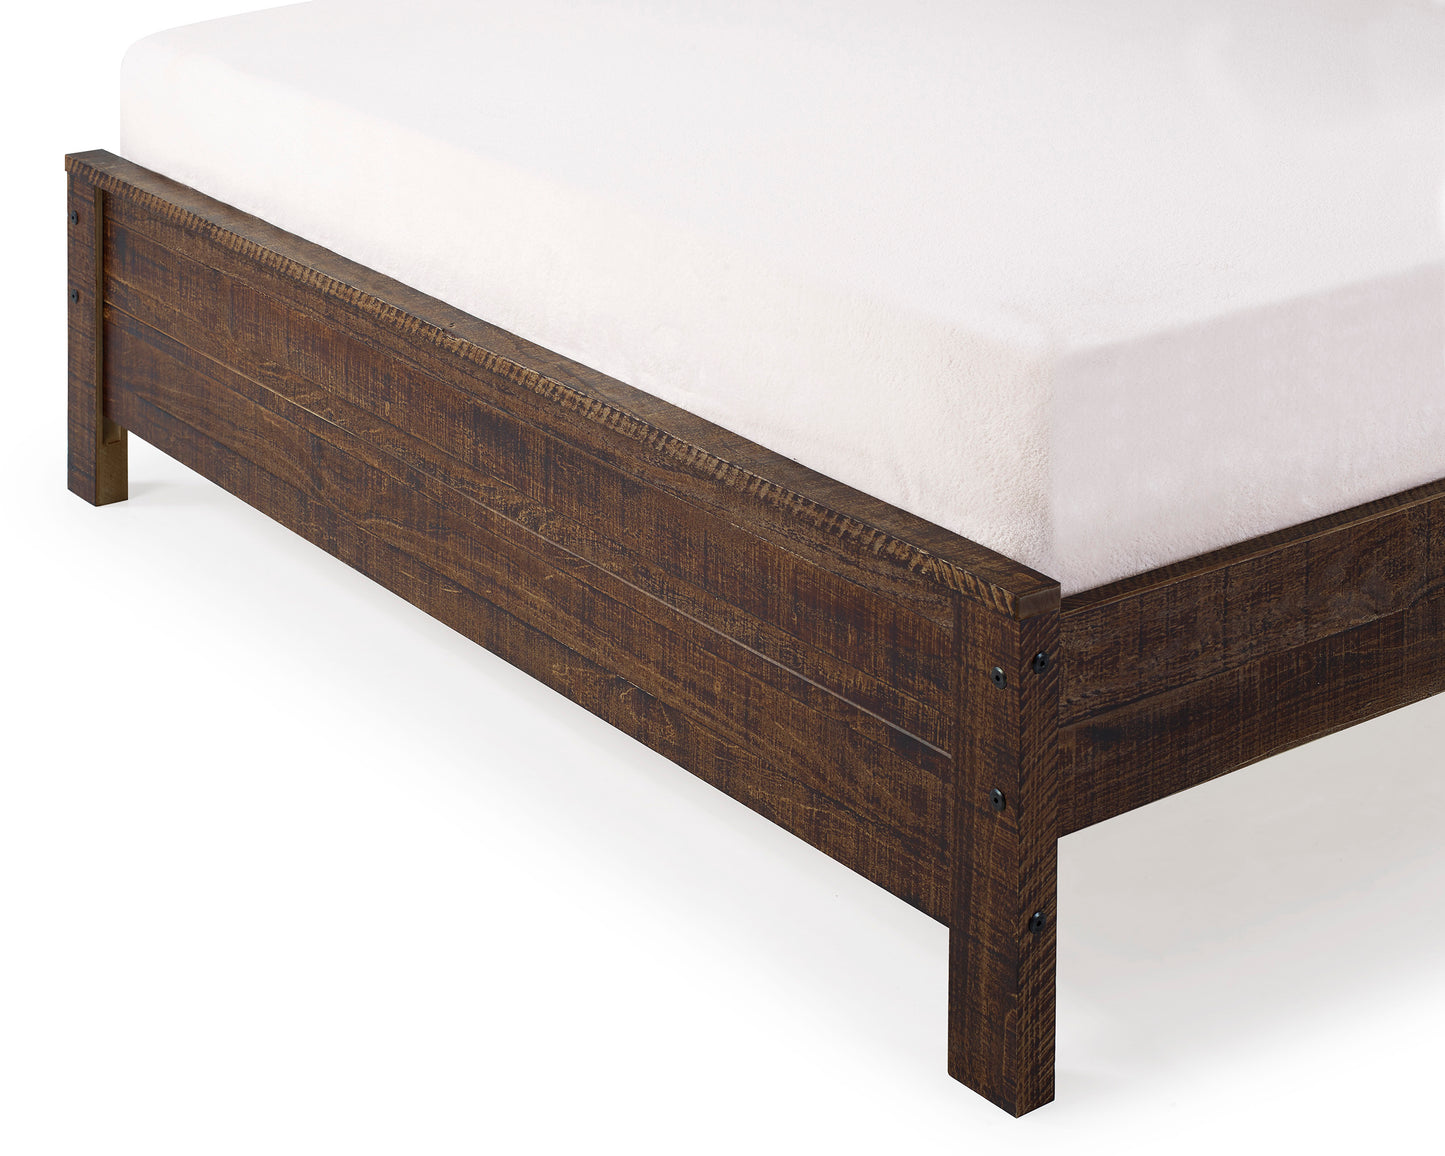 Albany Solid Wood Full Bed Frame with Headboard, Heavy Duty Modern Rustic Full Size Bed Frames, Box Spring Needed